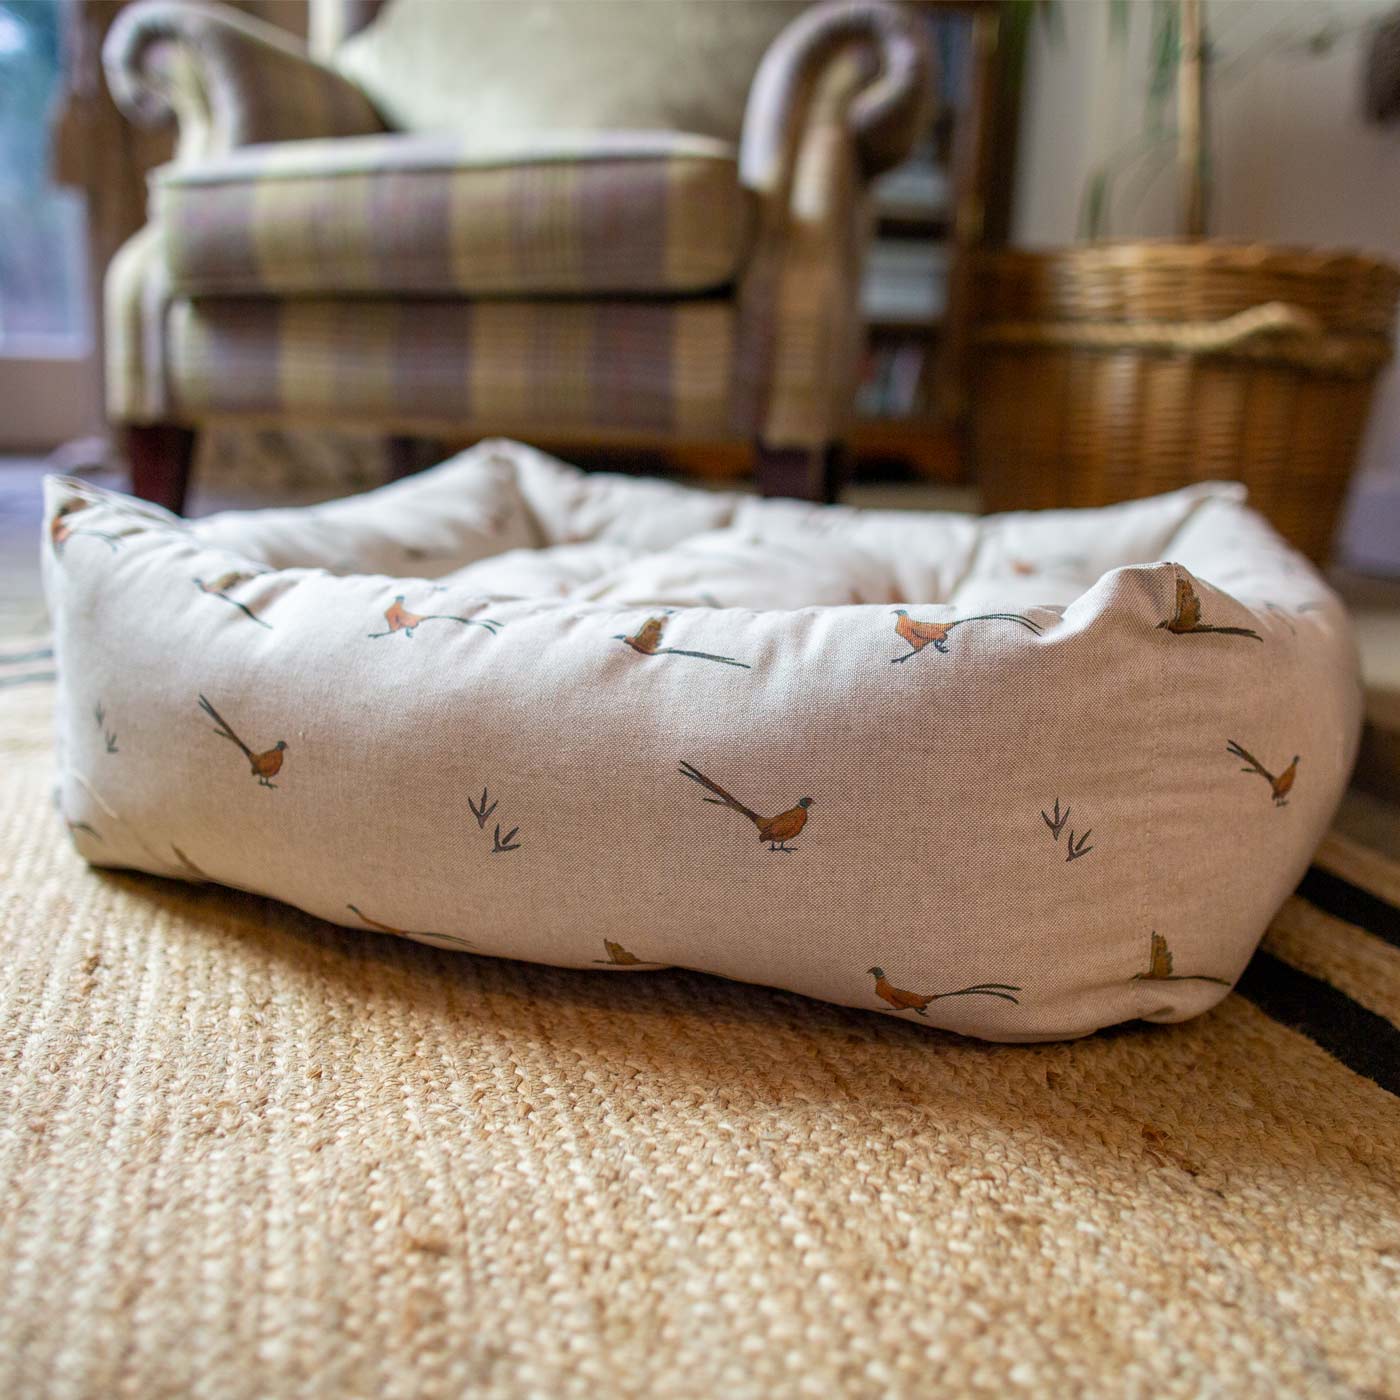 [colour:woodland pheasant] Luxury Handmade Box Bed For Dogs in Woodland, in Woodland Pheasant. Perfect For Your Pets Nap Time! Available To Personalise at Lords & Labradors